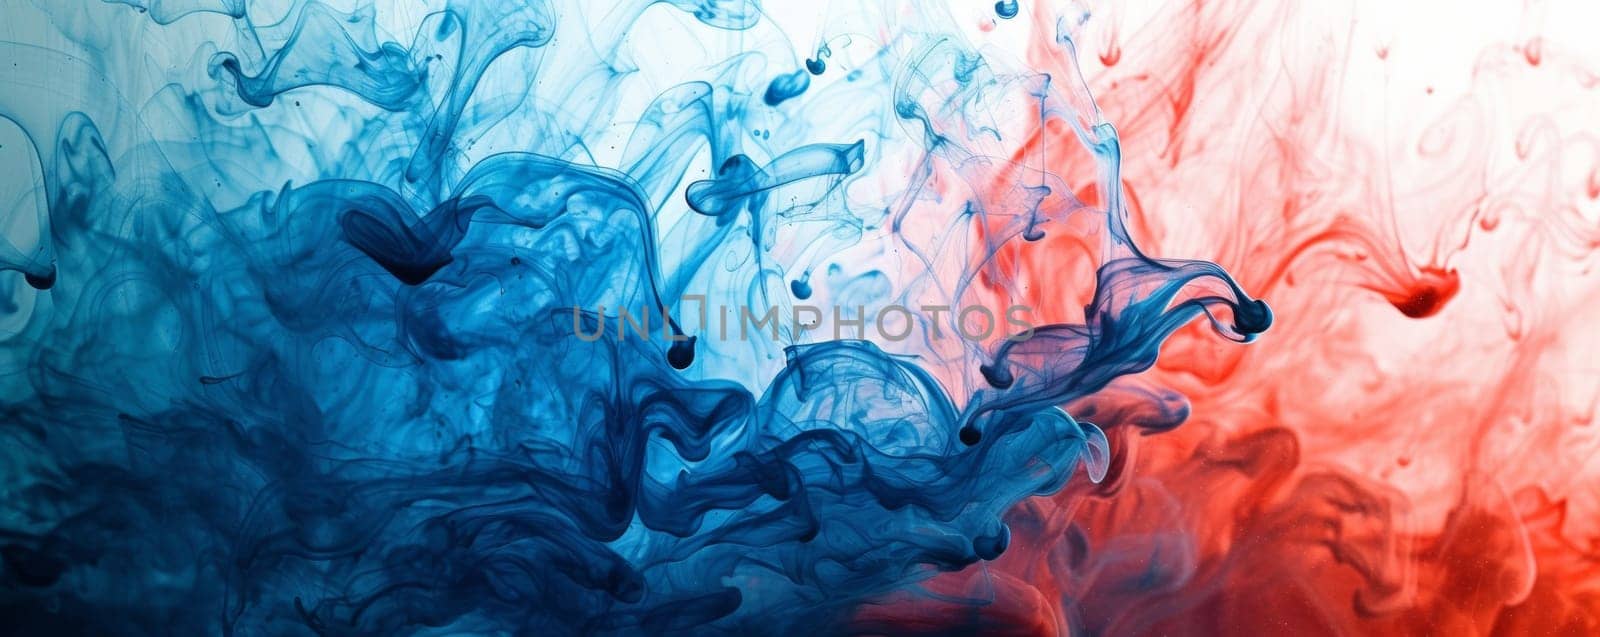 Red and Blue Liquid in Water by Anastasiia